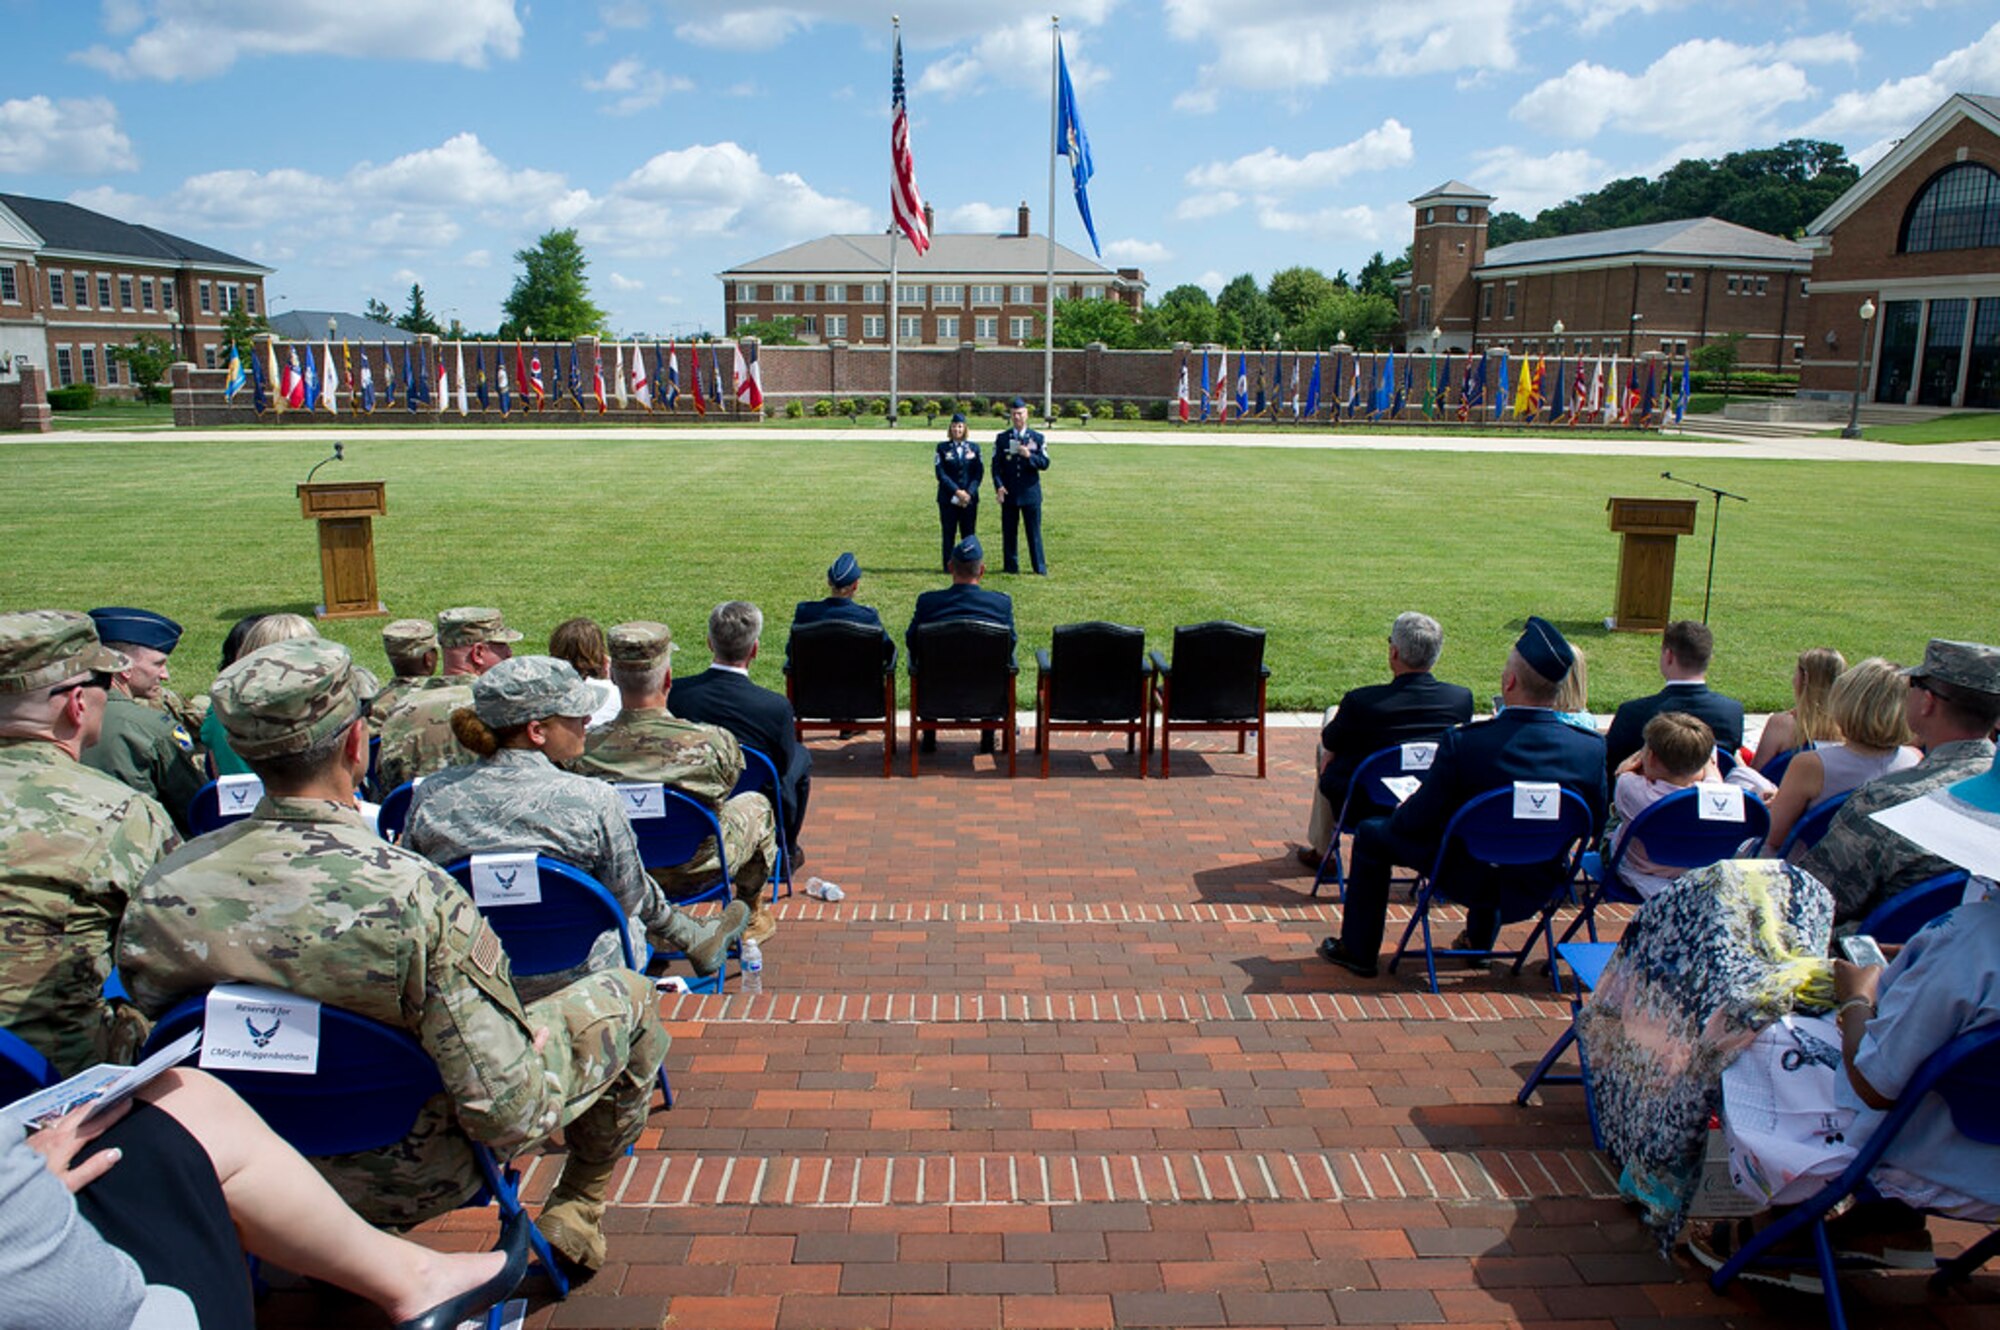 Chief Master Sgts. Melanie K. Noel, Air Force District of Washington command chief, left, and Michael D. Noel, Senior Enlisted Advisor to the Assistant to the Secretary of Defense for Public Affairs, speak to guests during their combined retirement ceremony at Joint Base Anacostia-Bolling, Washington, D.C., May 31, 2019. (U.S. Air Force photo by Master Sgt. Michael B. Keller)